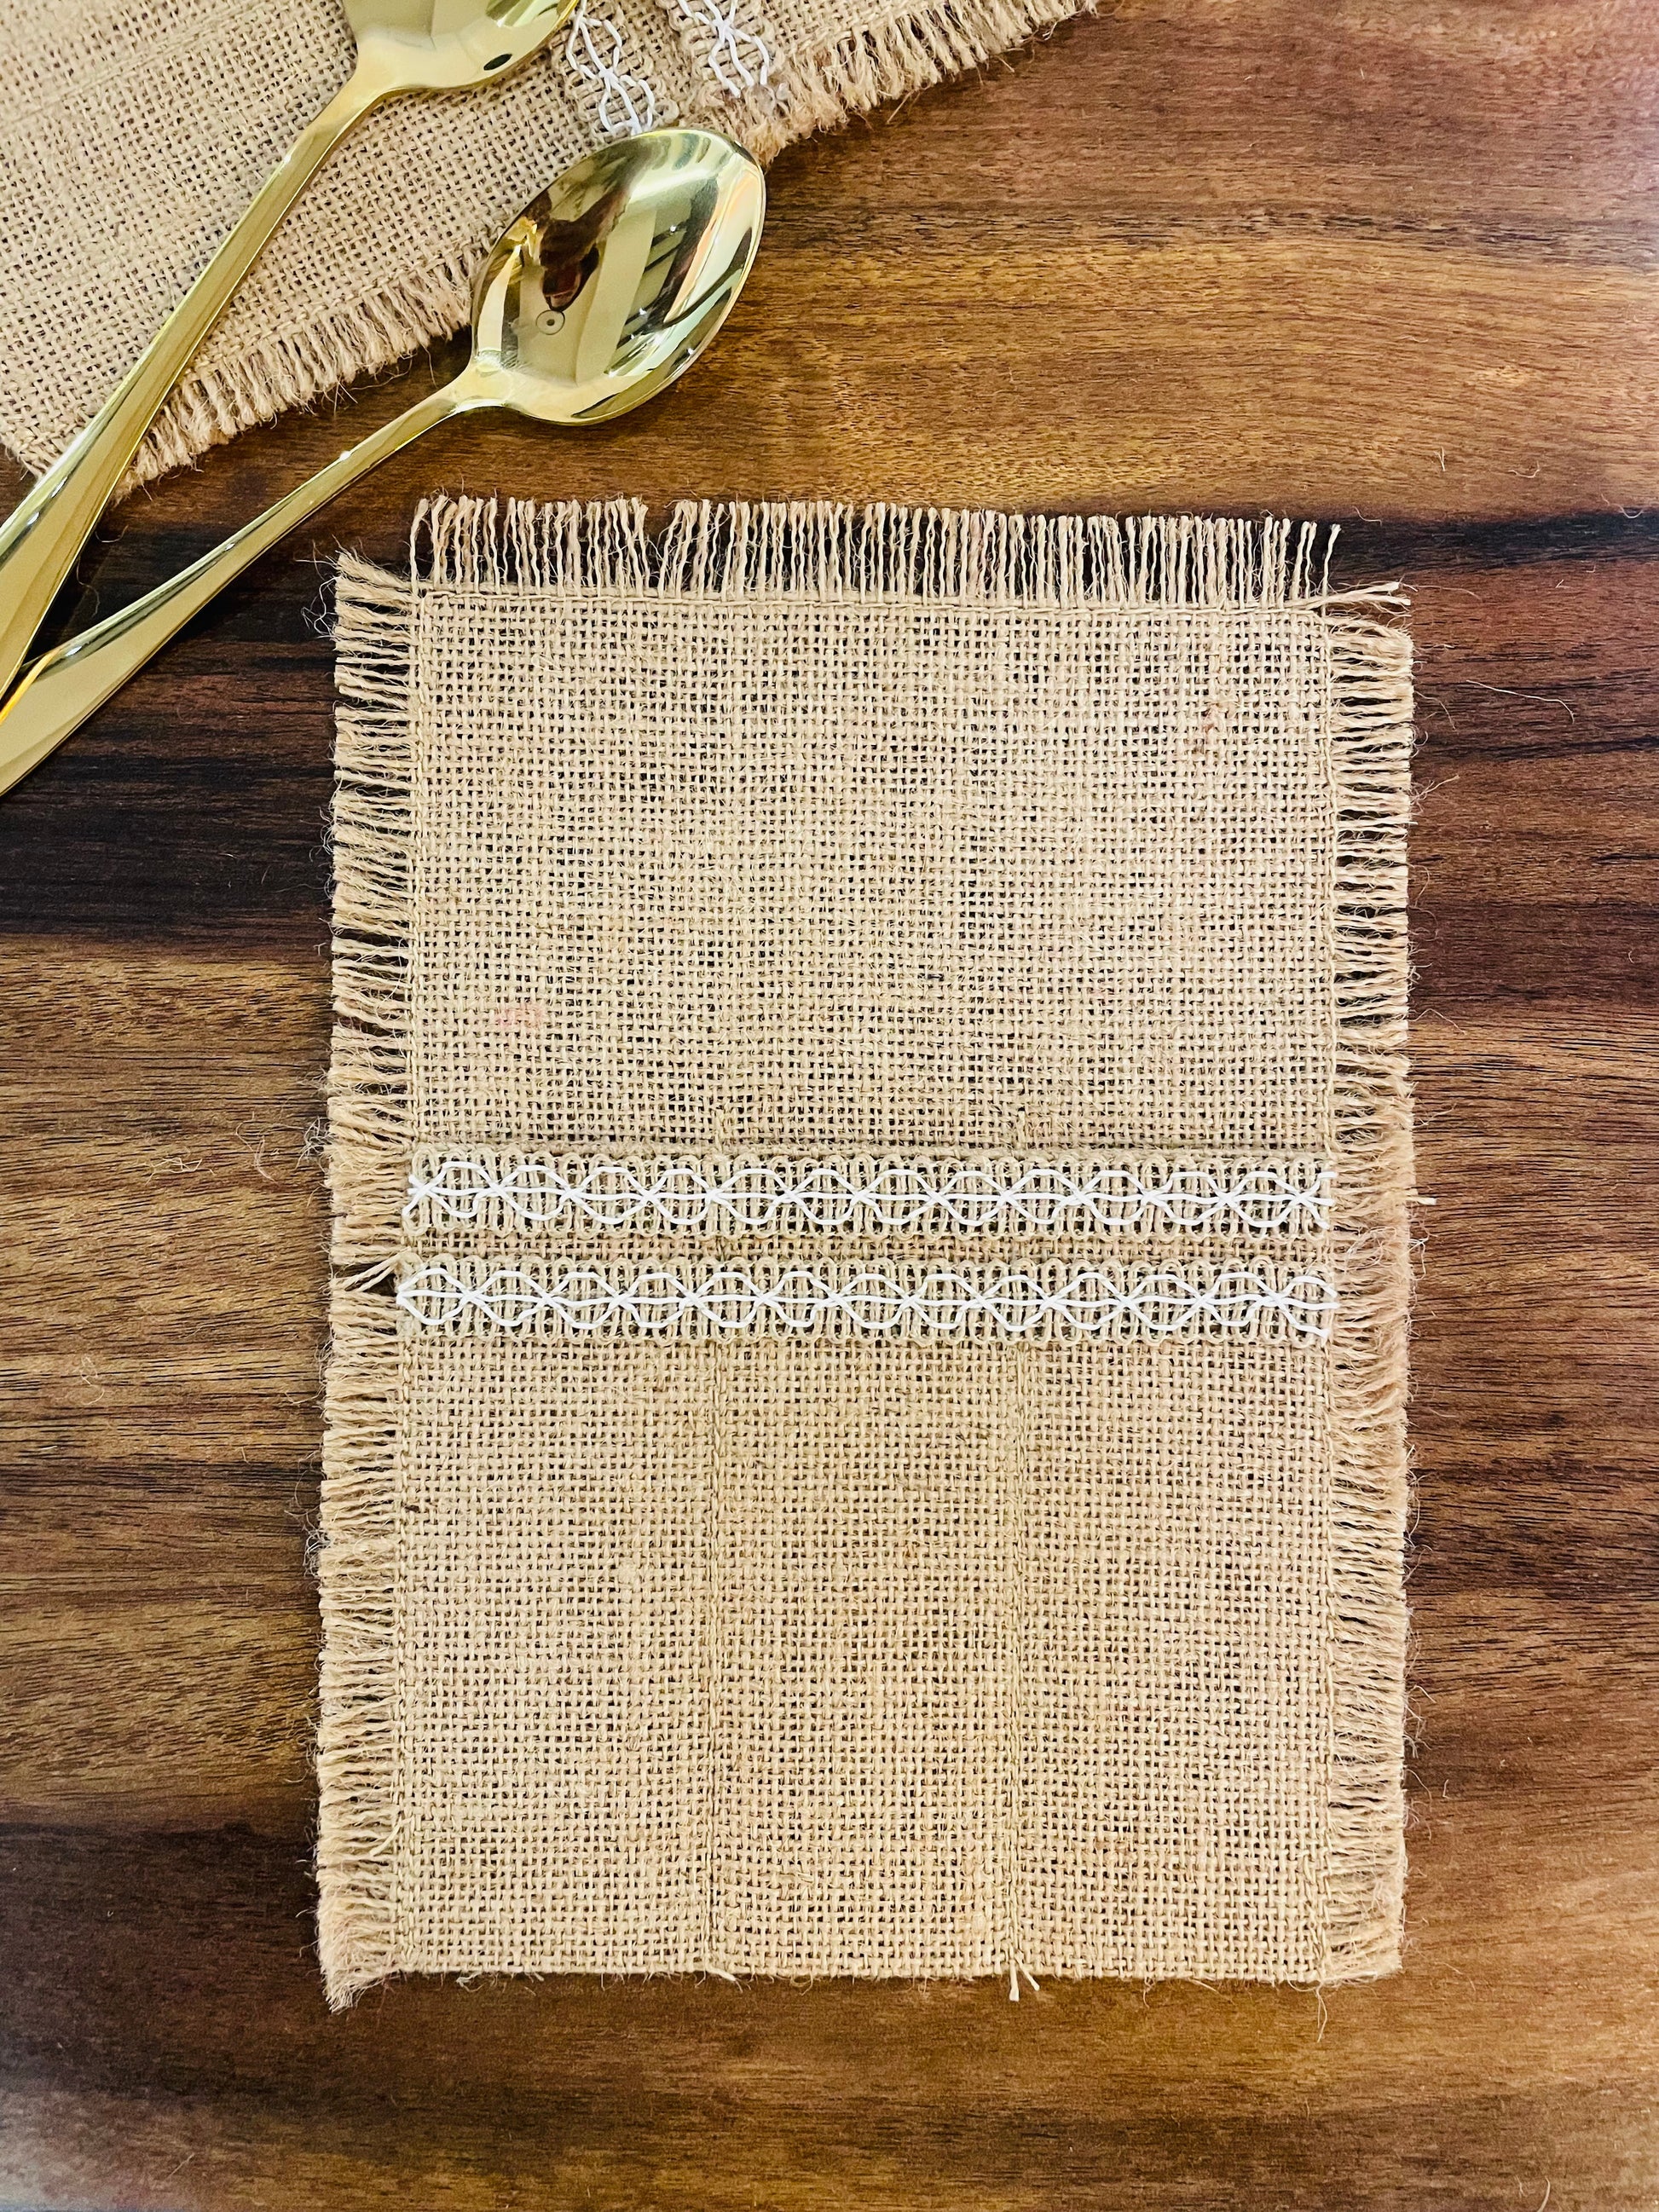 A set of cutlery holder made from natural jute and embellished with beautiful laces will surely add charm to your dining experience. It has three pockets perfectly sized to put small and big sized spoons , forks and knifes. Its neutral colour makes it perfect to go with both white and coloured crockery.